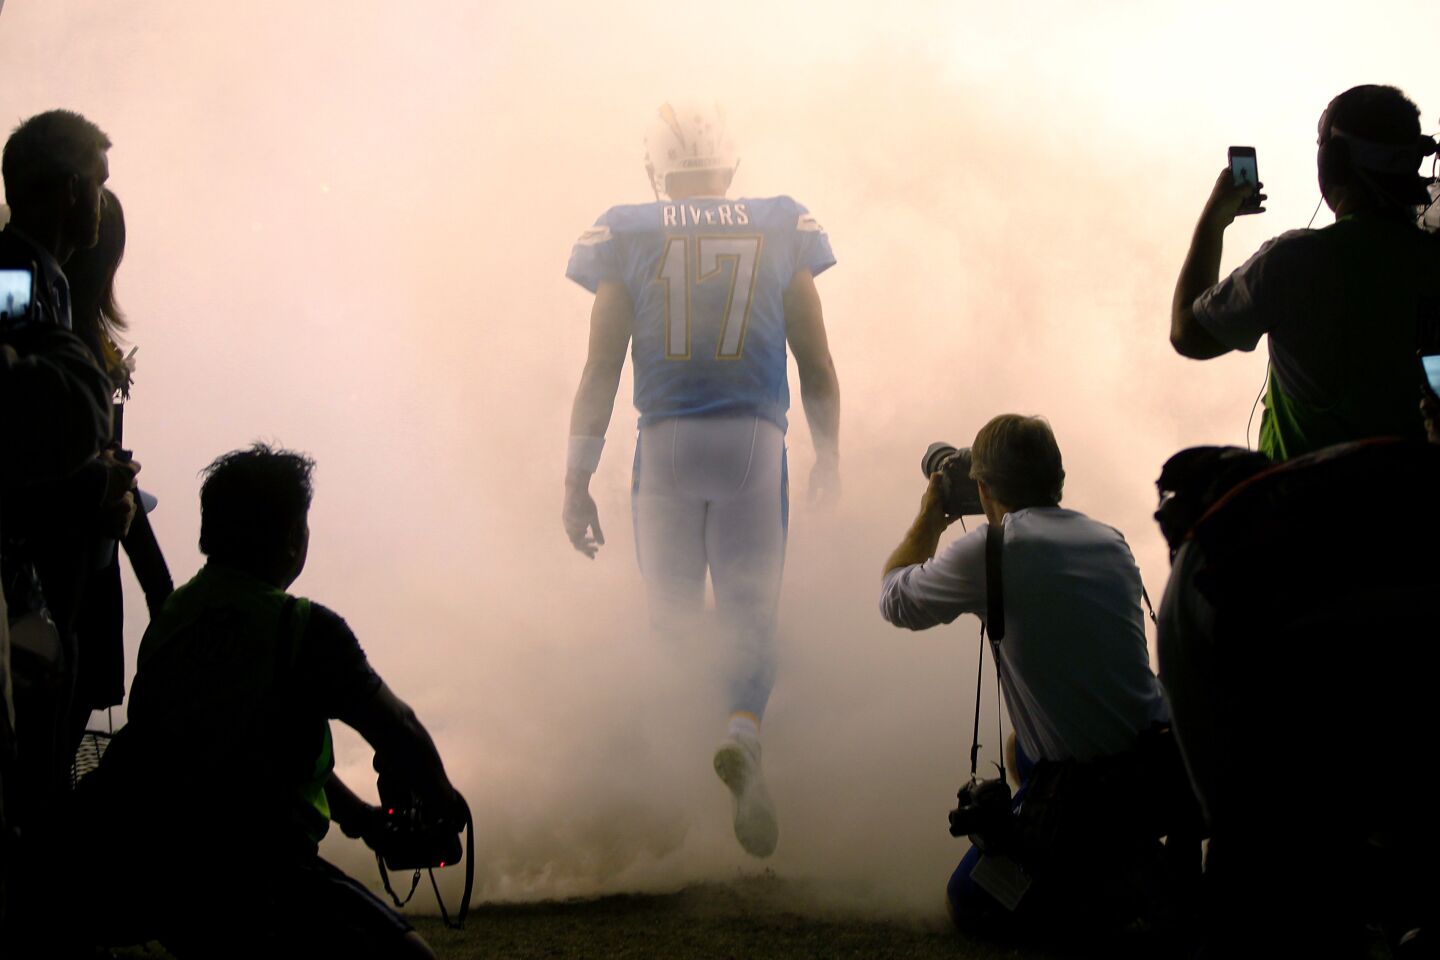 Chargers Philip Rivers is announced before a game against the Patriots at Qualcomm Stadium on Dec. 7, 2014.